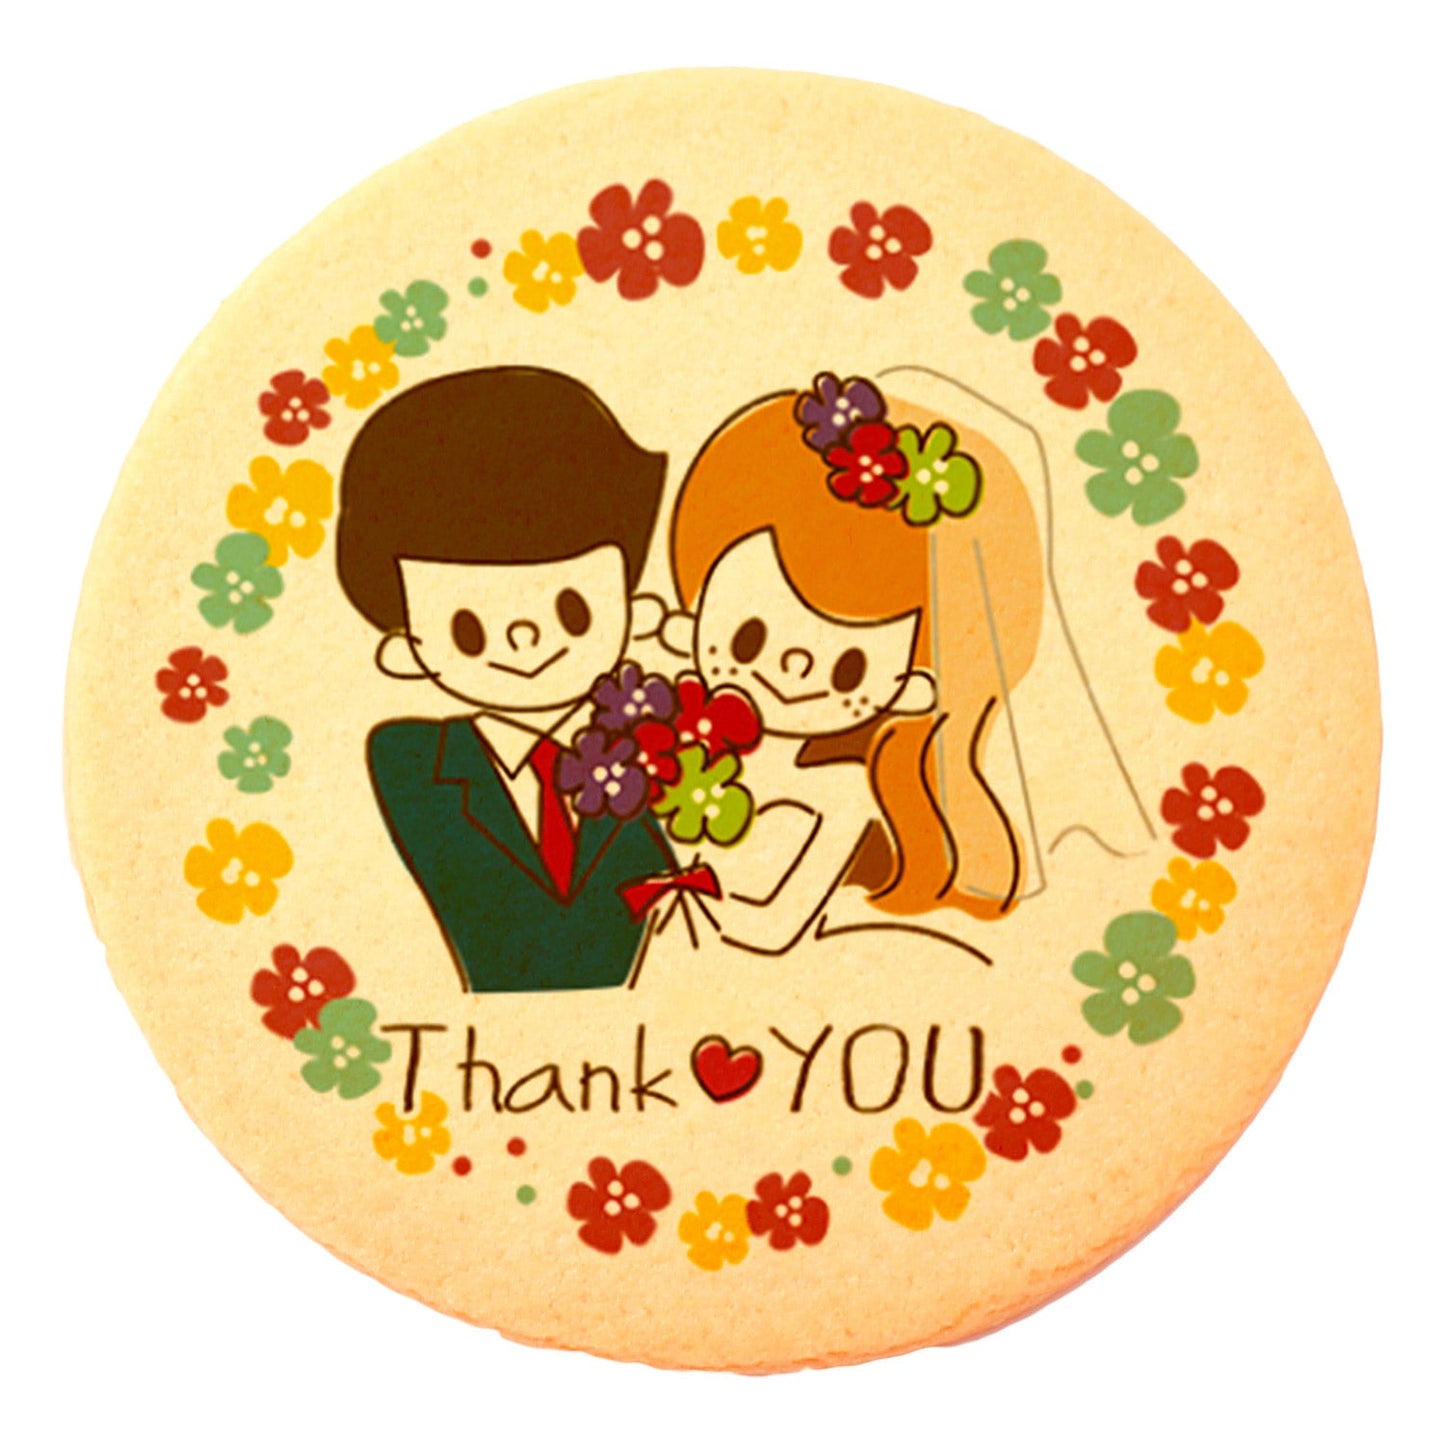 Thank you / a boy and a girl in Western wedding formal dress / 30ps